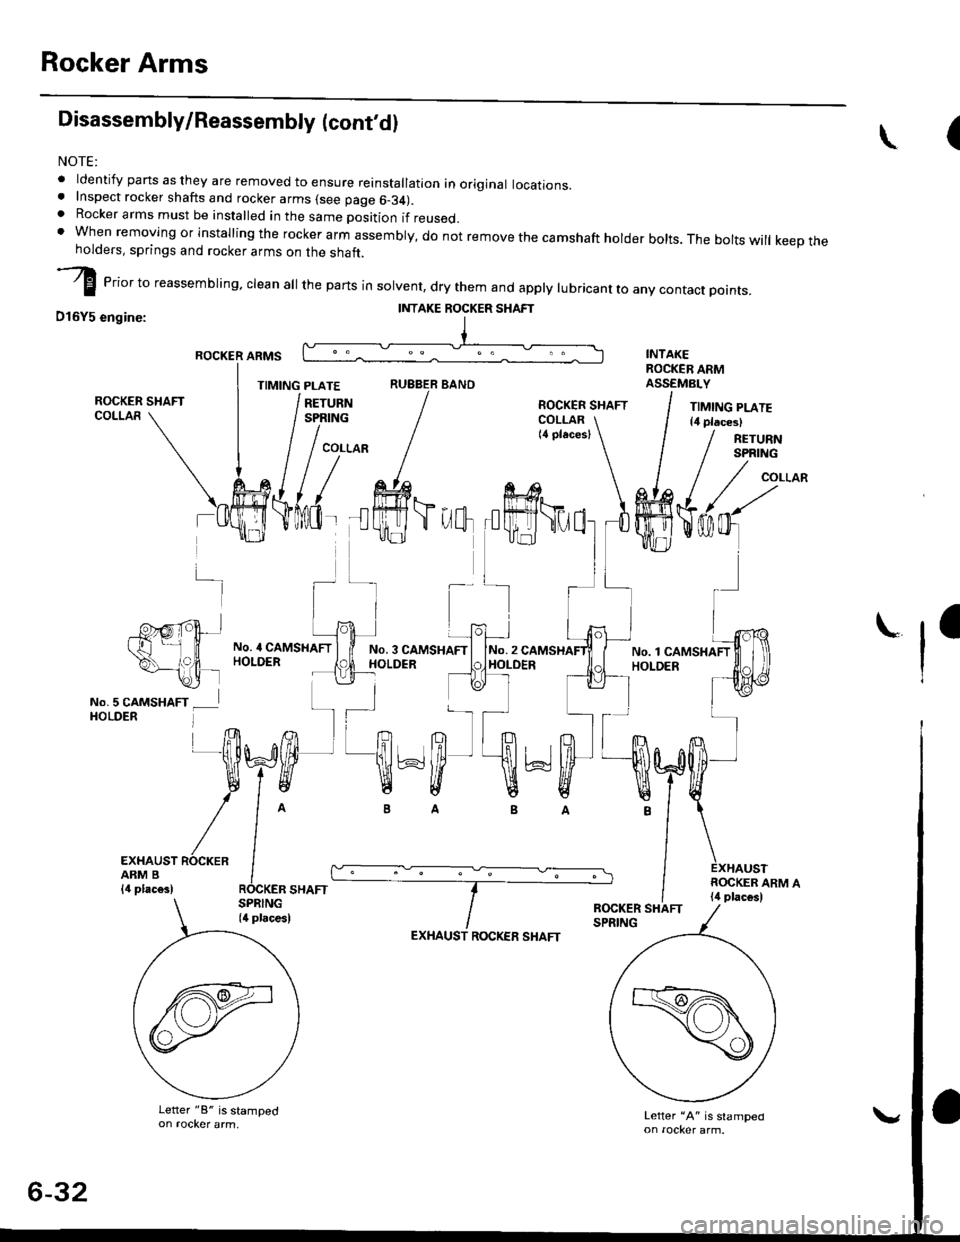 HONDA CIVIC 1997 6.G Workshop Manual Rocker Arms
Disassembly/Reassembly (contdl
NOTE:
. ldentify pans as they are removed to ensure reinstallation in original locations.. Inspect rocker shafts and rocker arms (see page 6-34).. Rocker ar